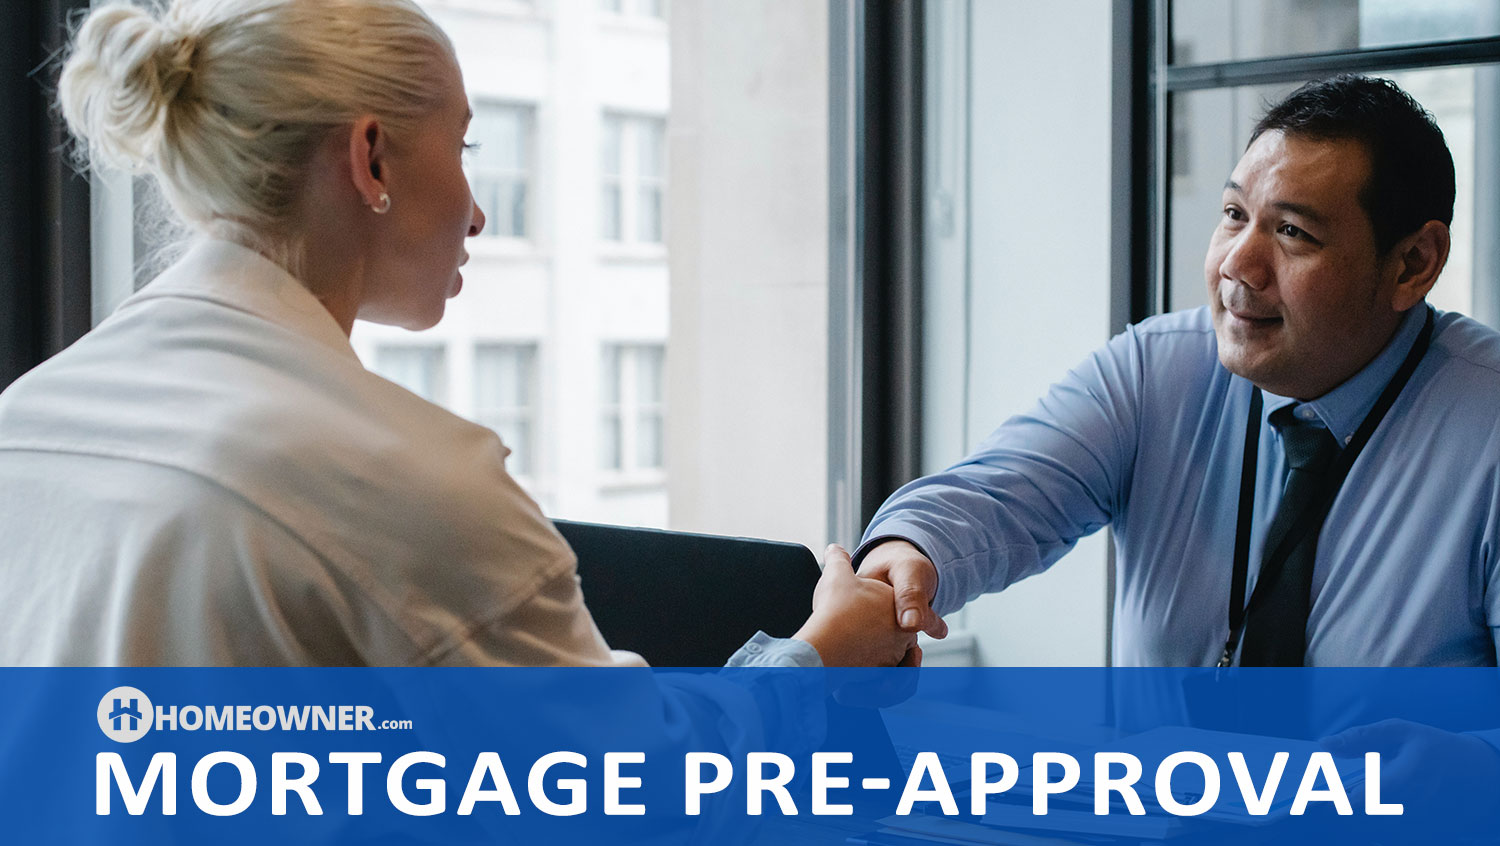 How To Get a Mortgage Pre-Approval